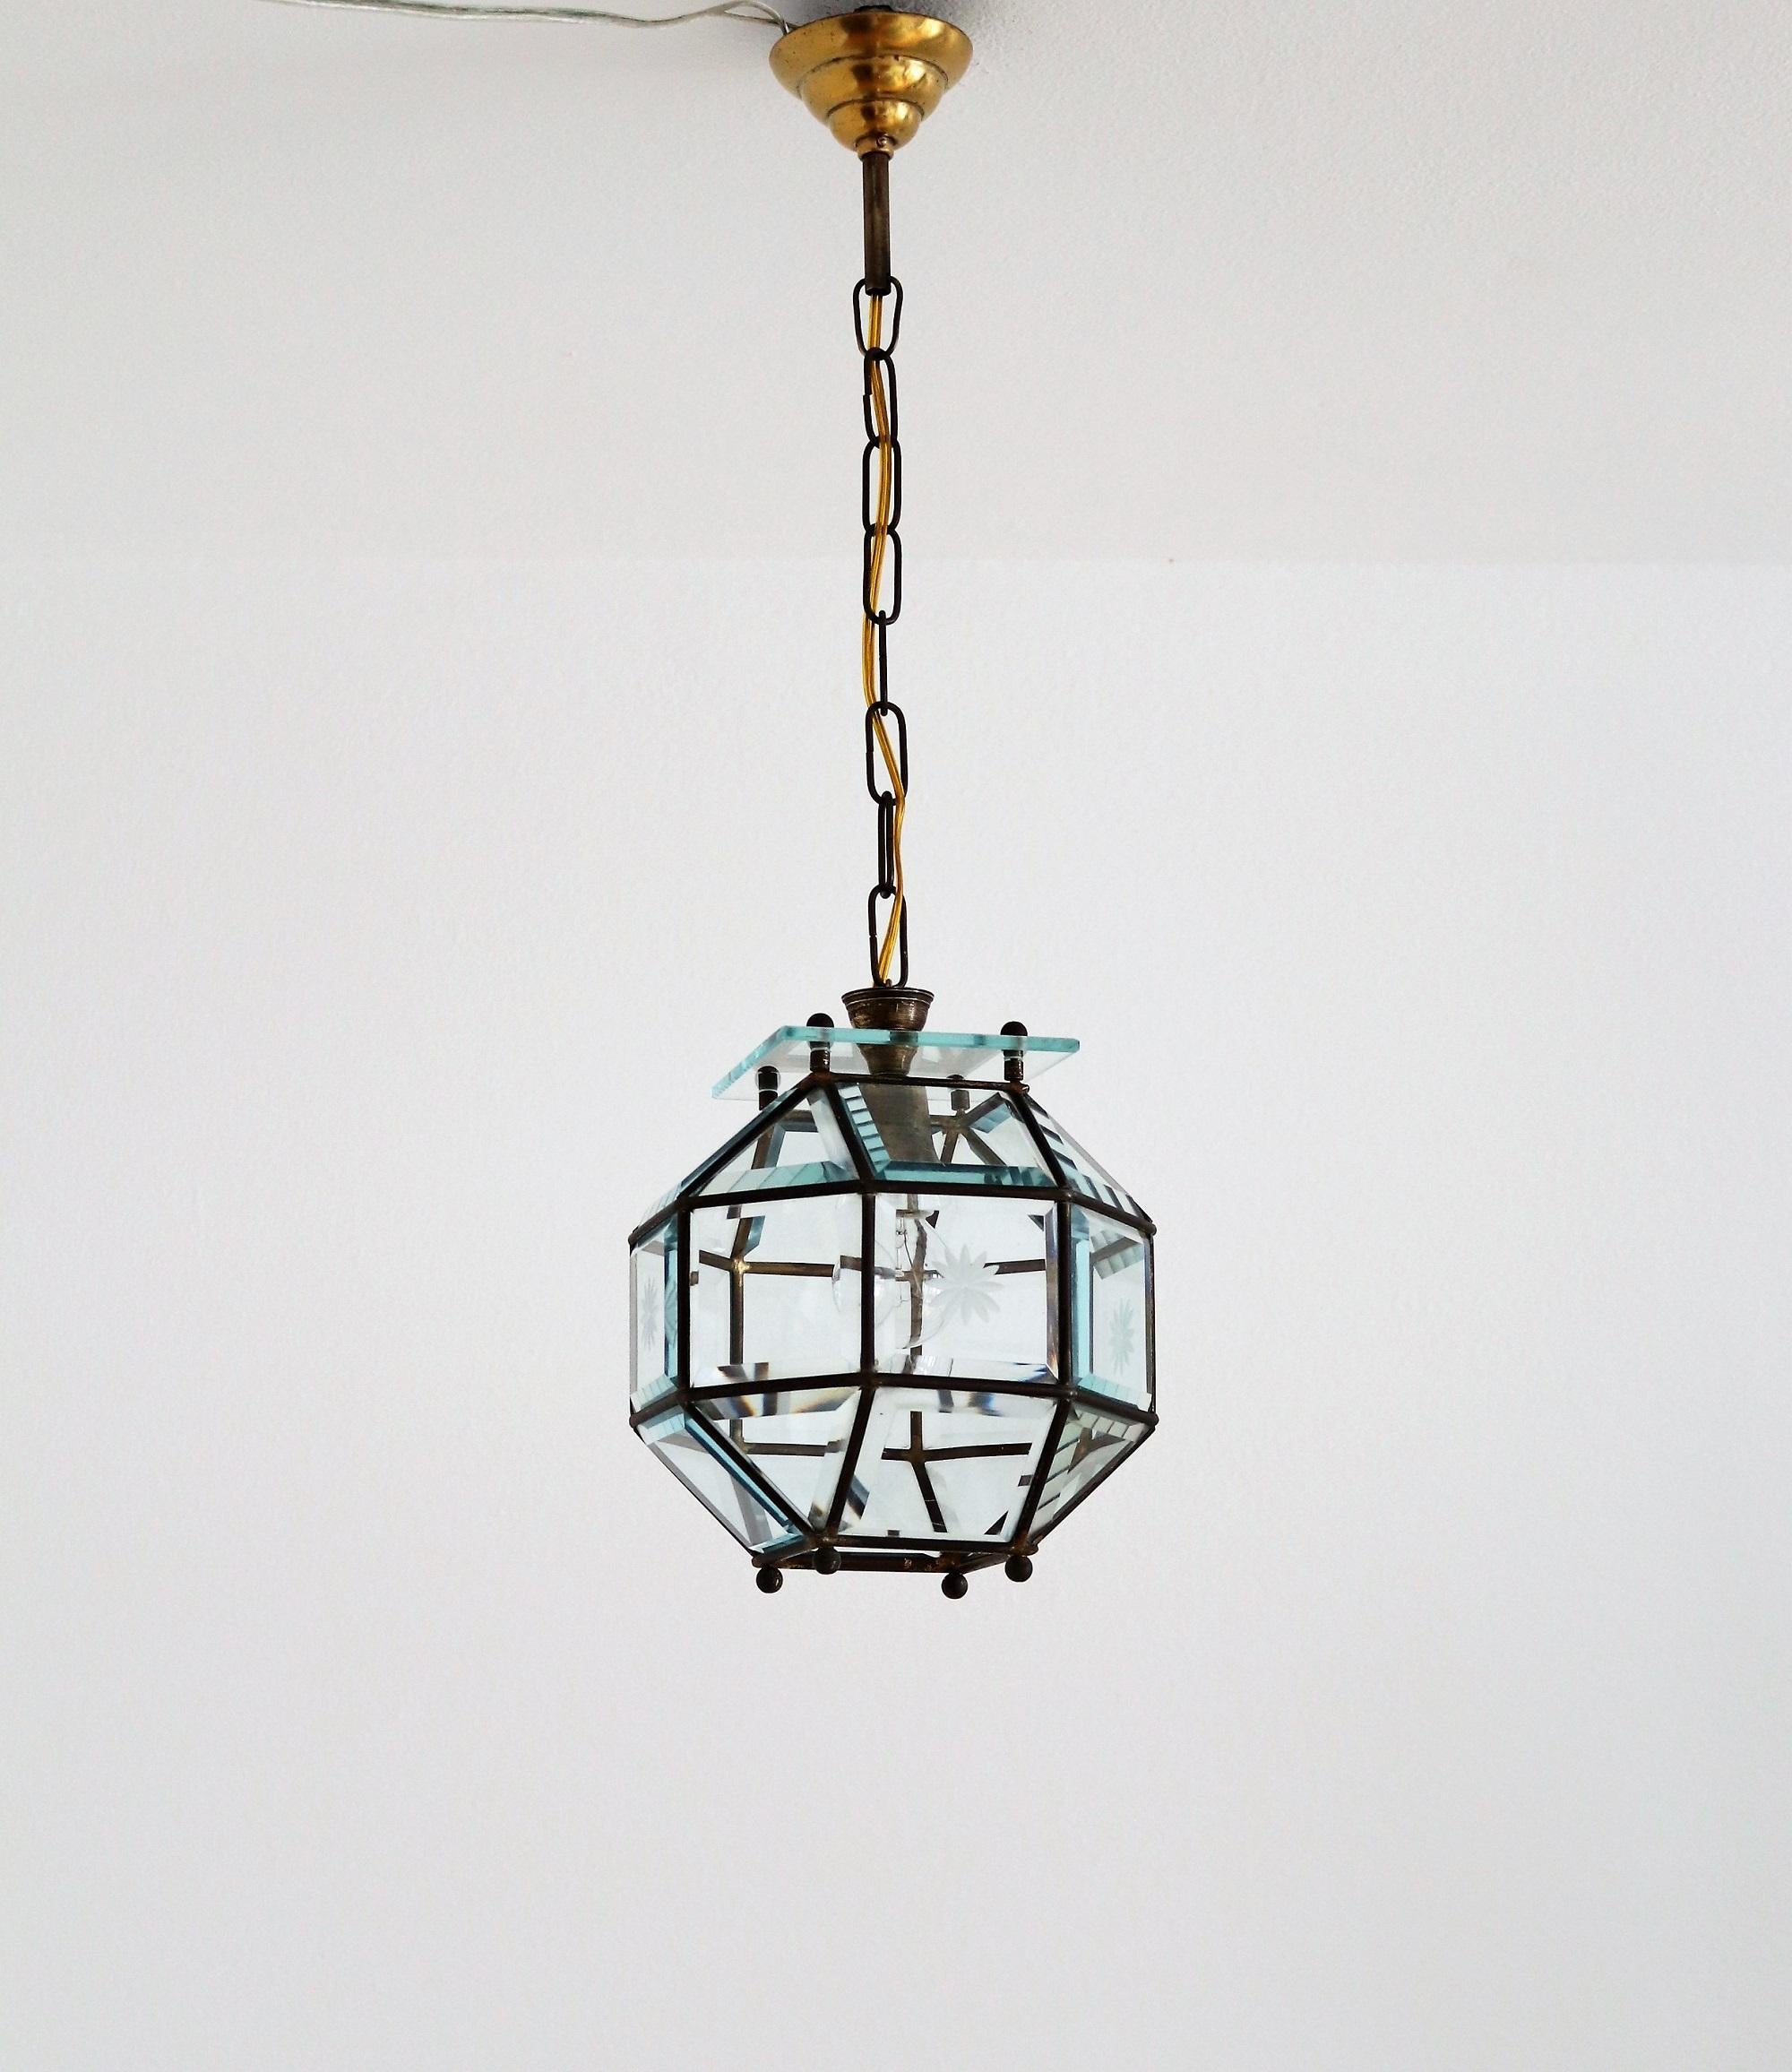 Beautiful lantern or pendant lamp made of shiny cut crystal glass and full brass lamp frame.
Made in the manner of Adolf Loos, an Art Nouveau Austrian secessionist.
The brass of the lamp has got a beautiful dark patina over the years. There are